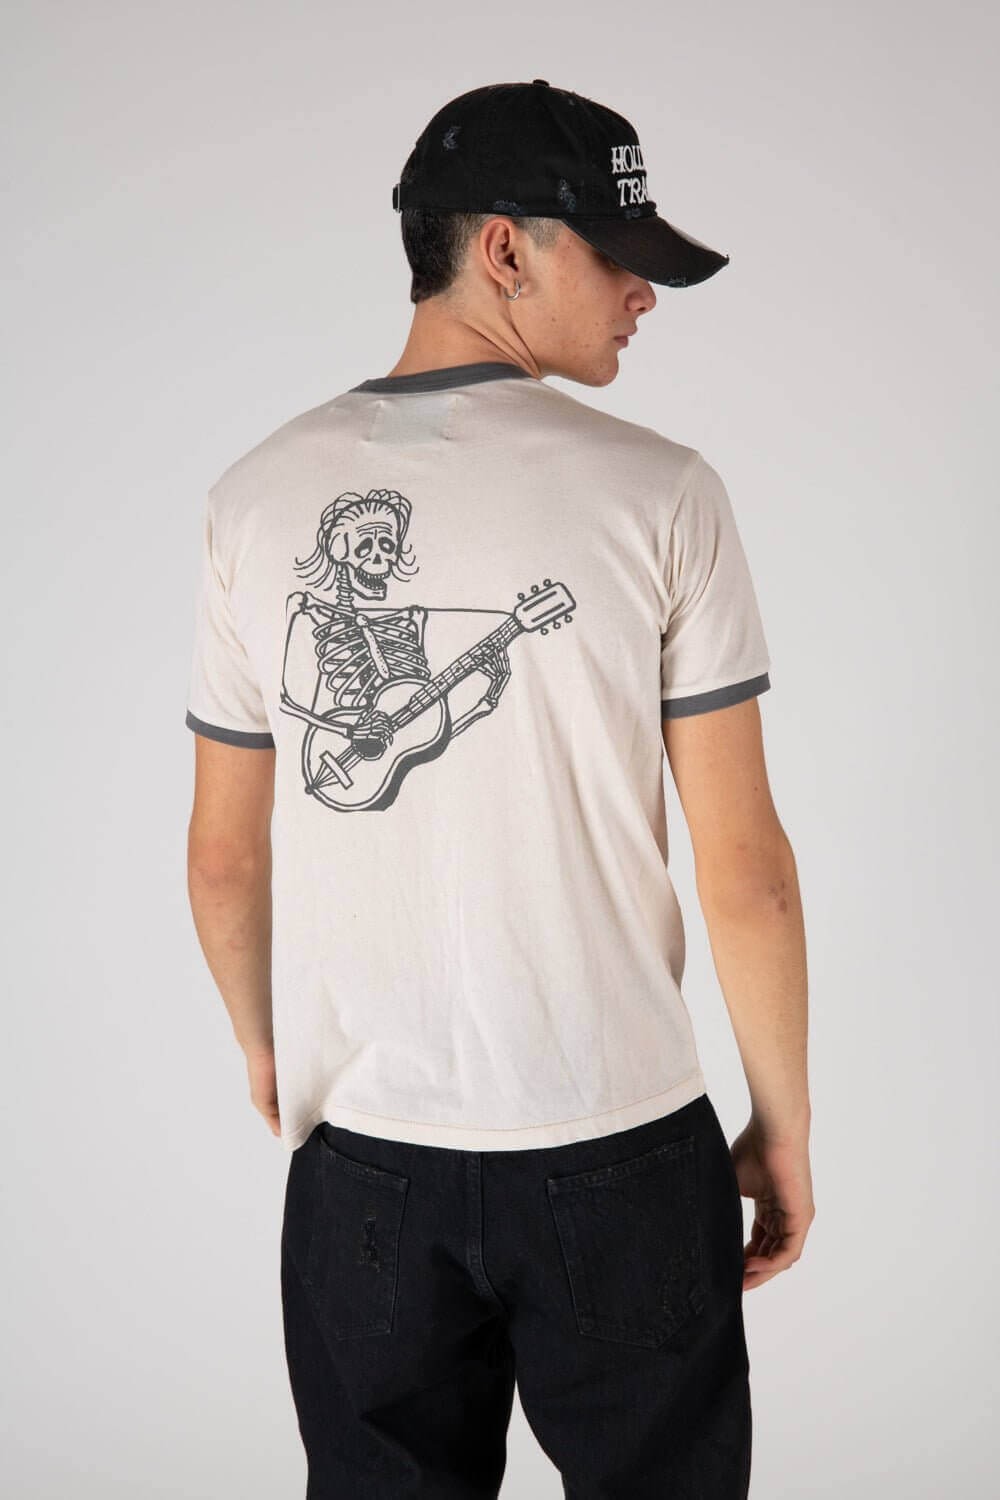 ARMLESS - SINGERS Regular fit t-shirt printed on the front. Composition: 100% Cotton HTC LOS ANGELES